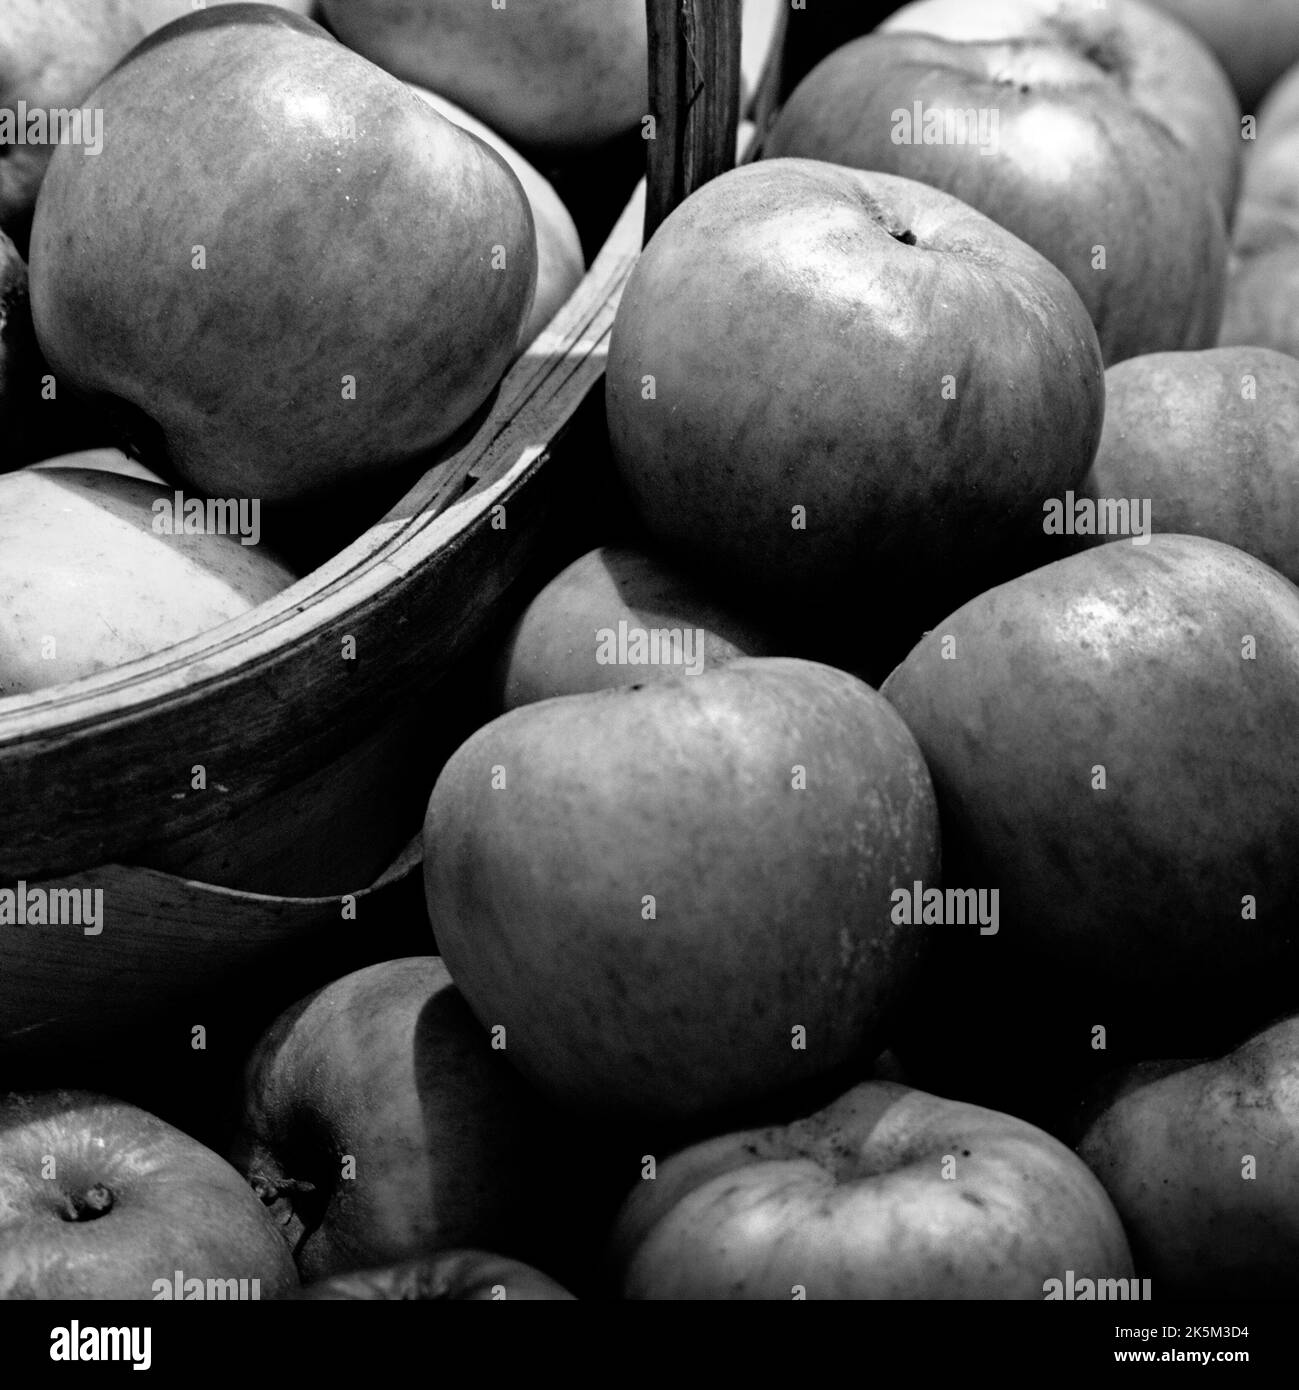 A monochrome image of a basket of harvested Ribston Pippin apples on a kitchen table. Stock Photo